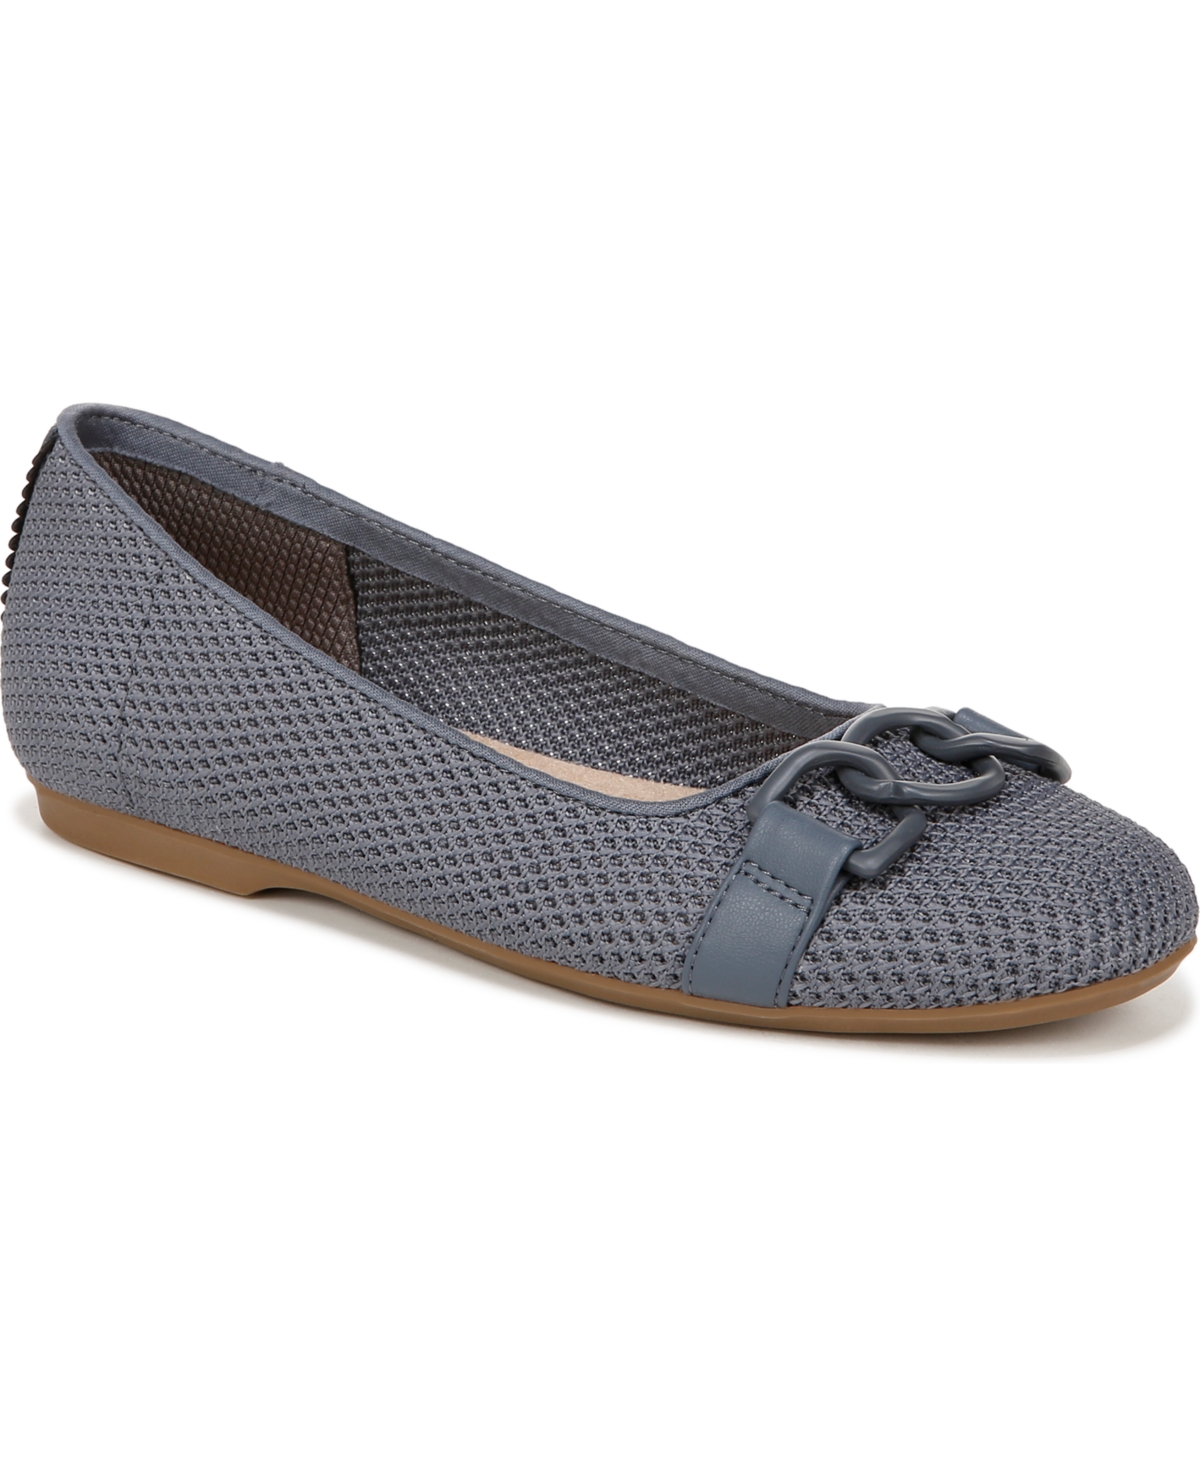 Women's Wexley Adorn Flats - Oxide Blue Knit Fabric/Faux Leather